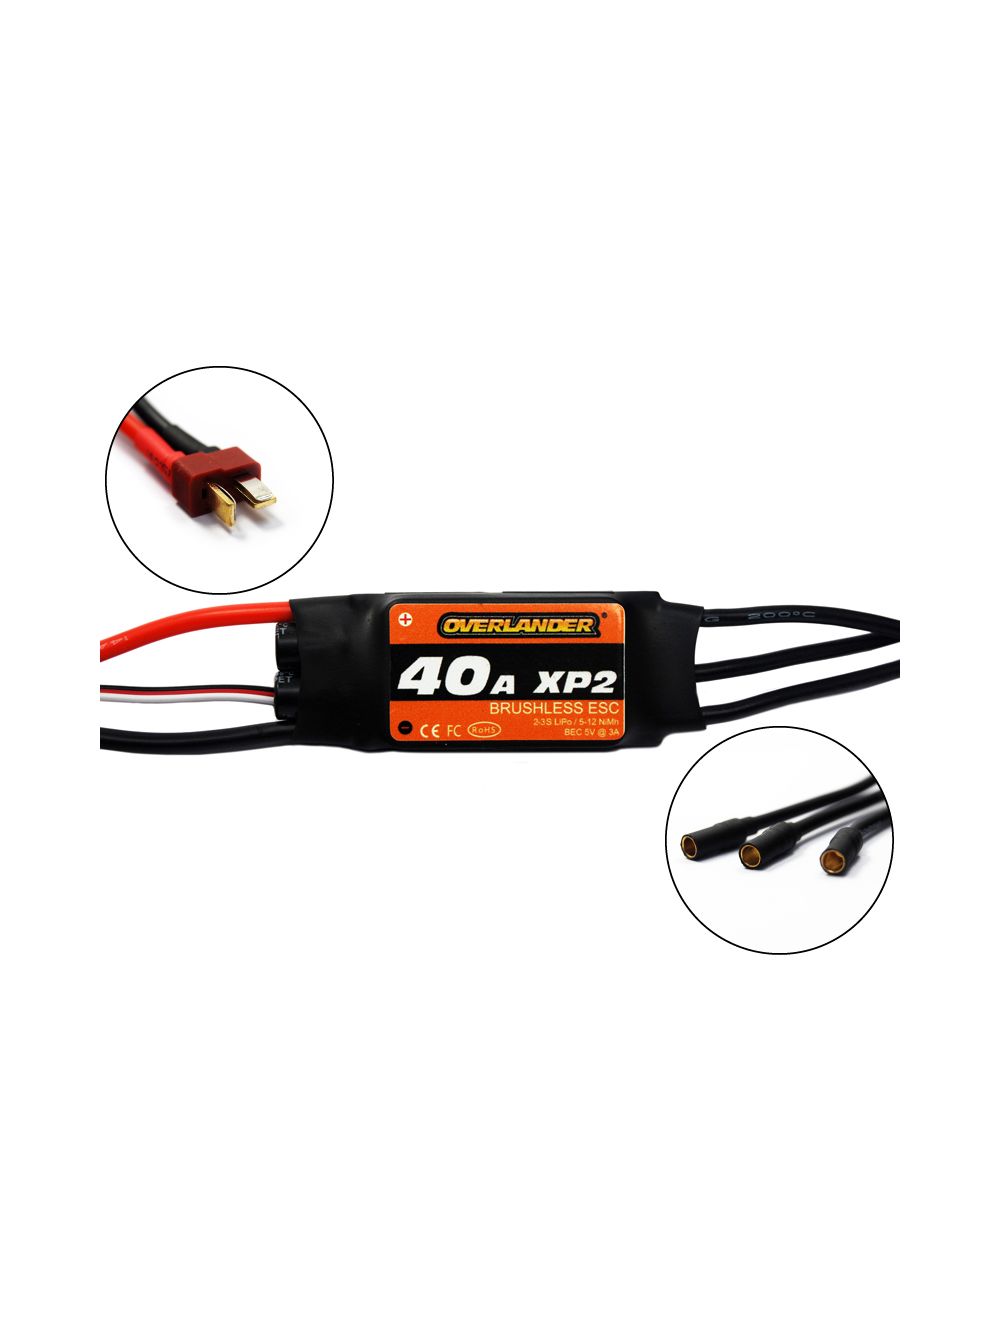 Overlander XP2 40A Brushless RTF (With Deans & 3.5mm Bullets) Speed Controller 2723